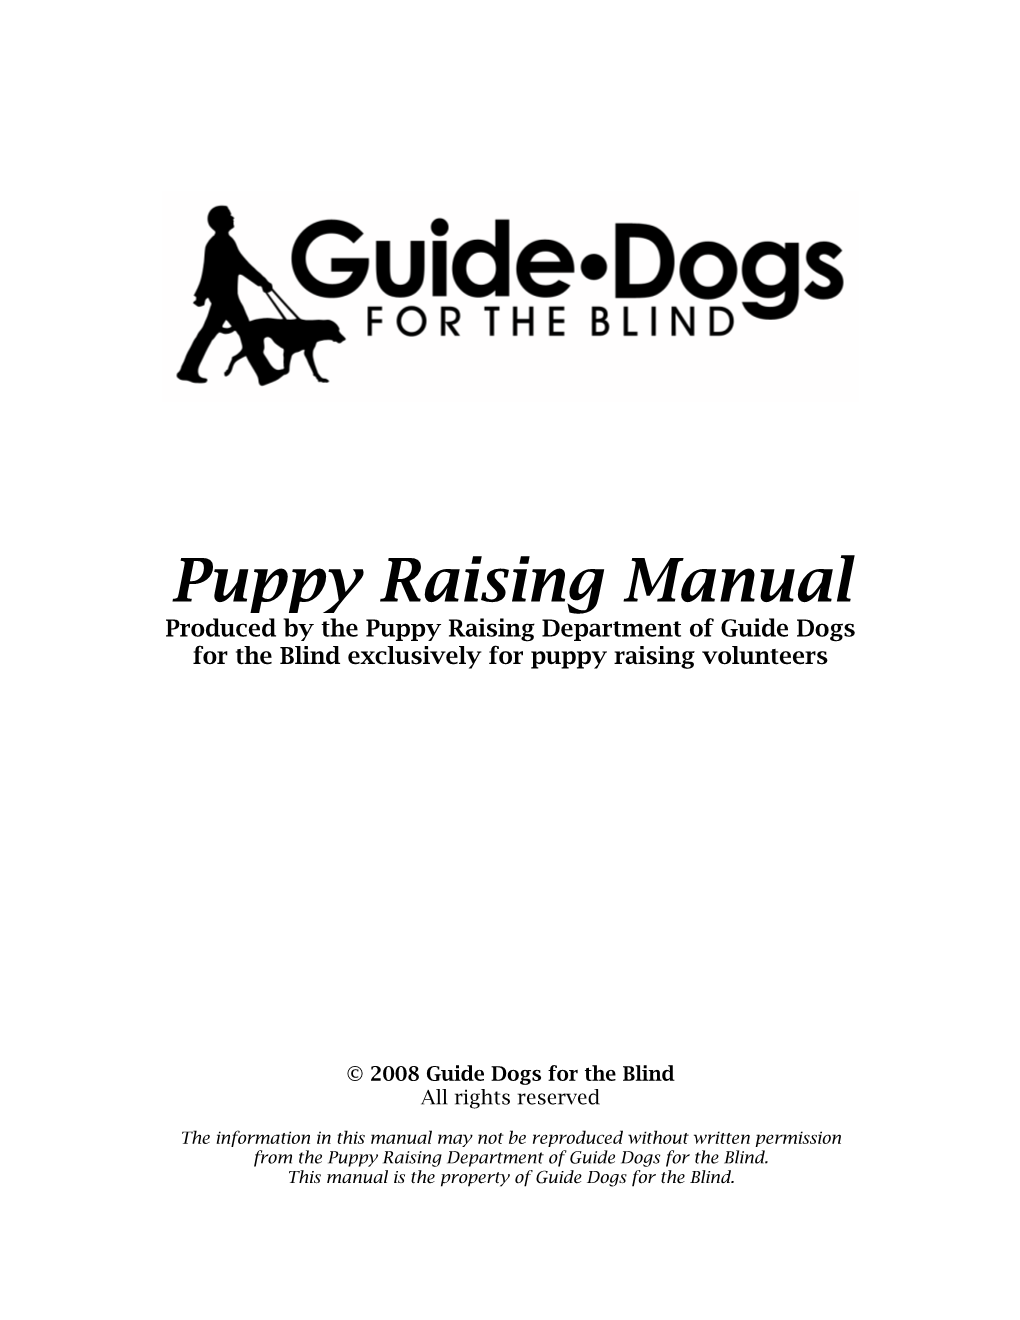 Puppy Raising Manual Produced by the Puppy Raising Department of Guide Dogs for the Blind Exclusively for Puppy Raising Volunteers